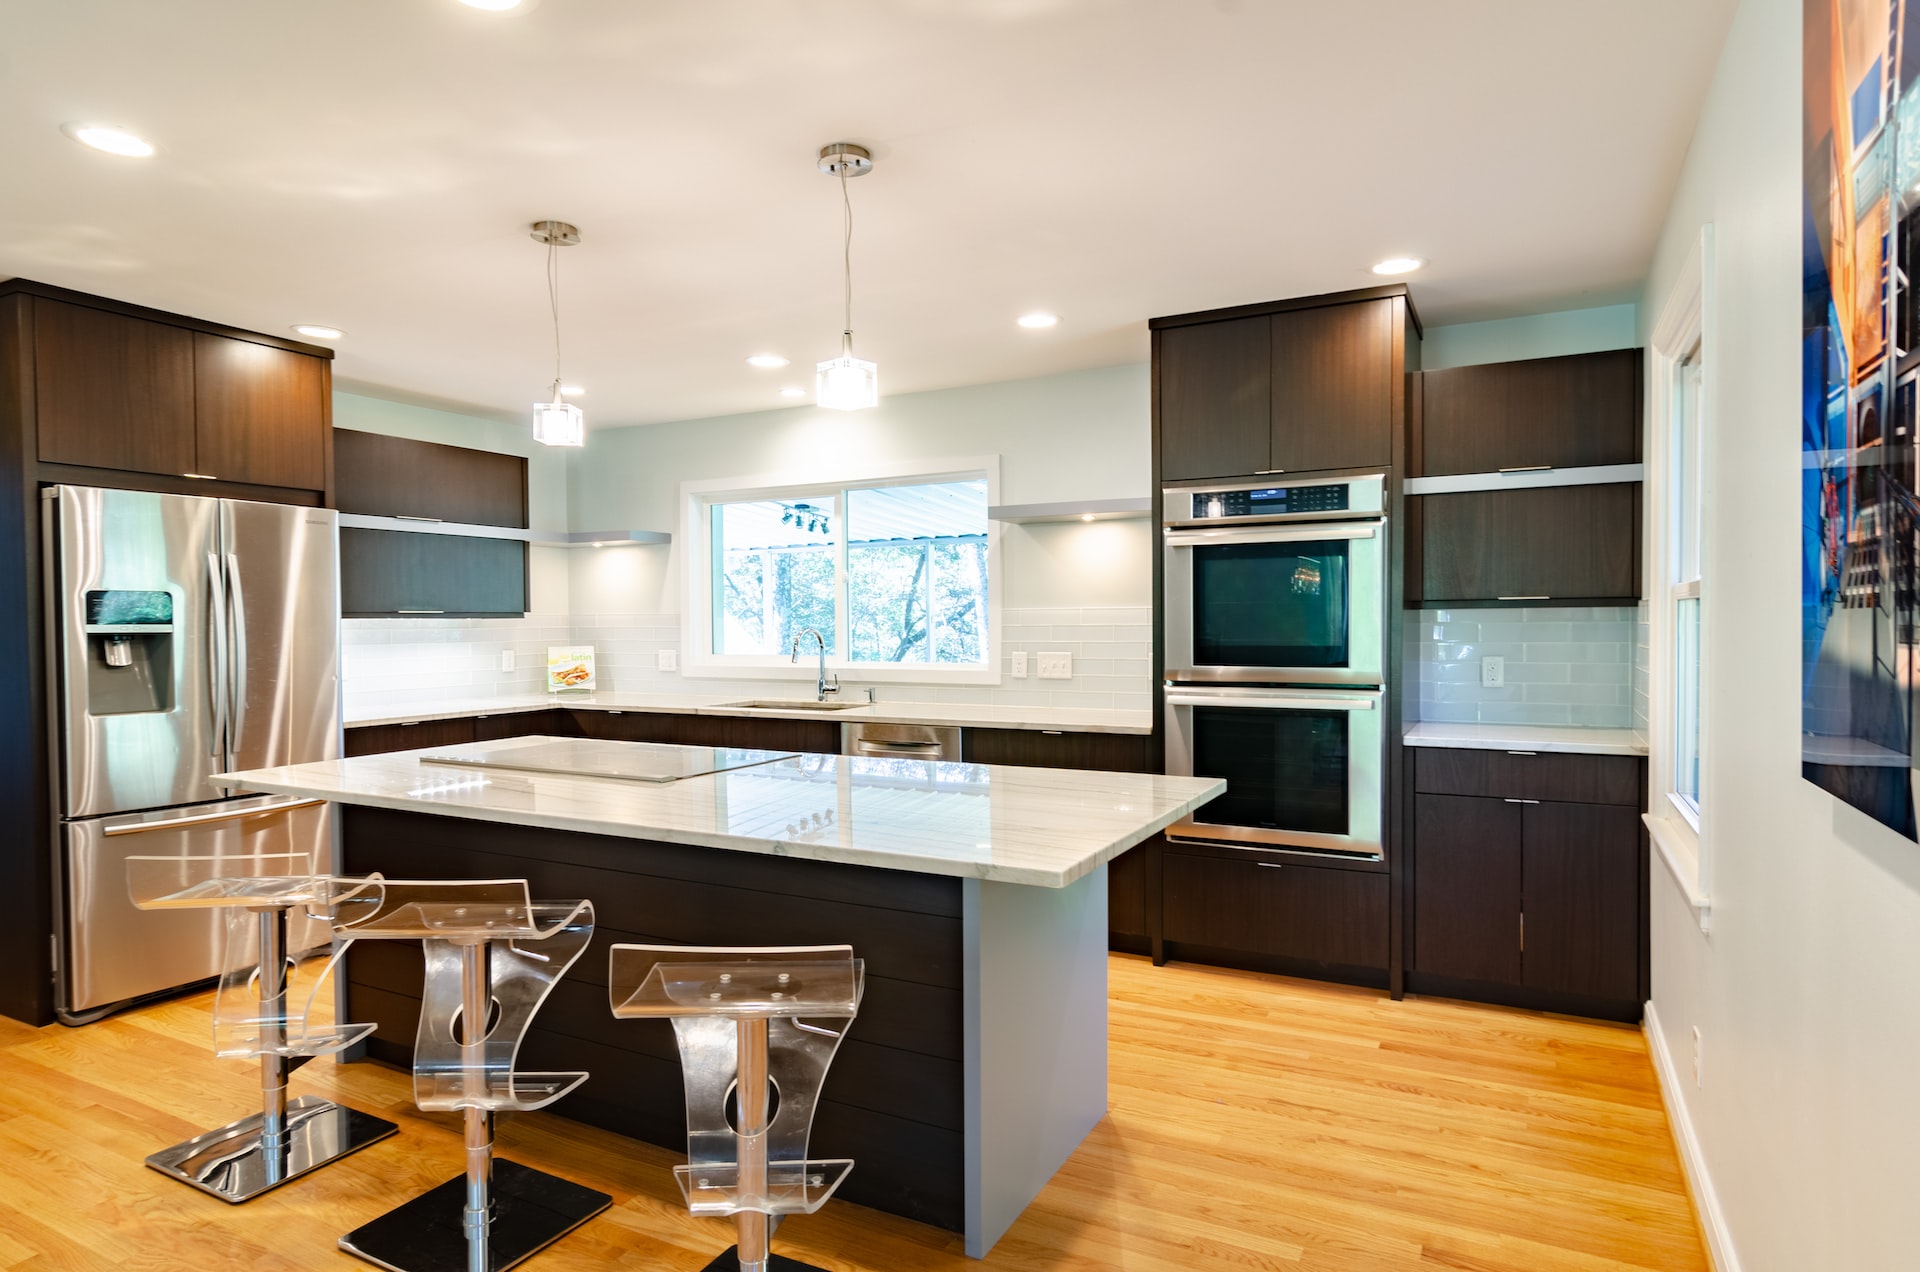 A stylish kitchen with modern features, including the latest appliances and tech